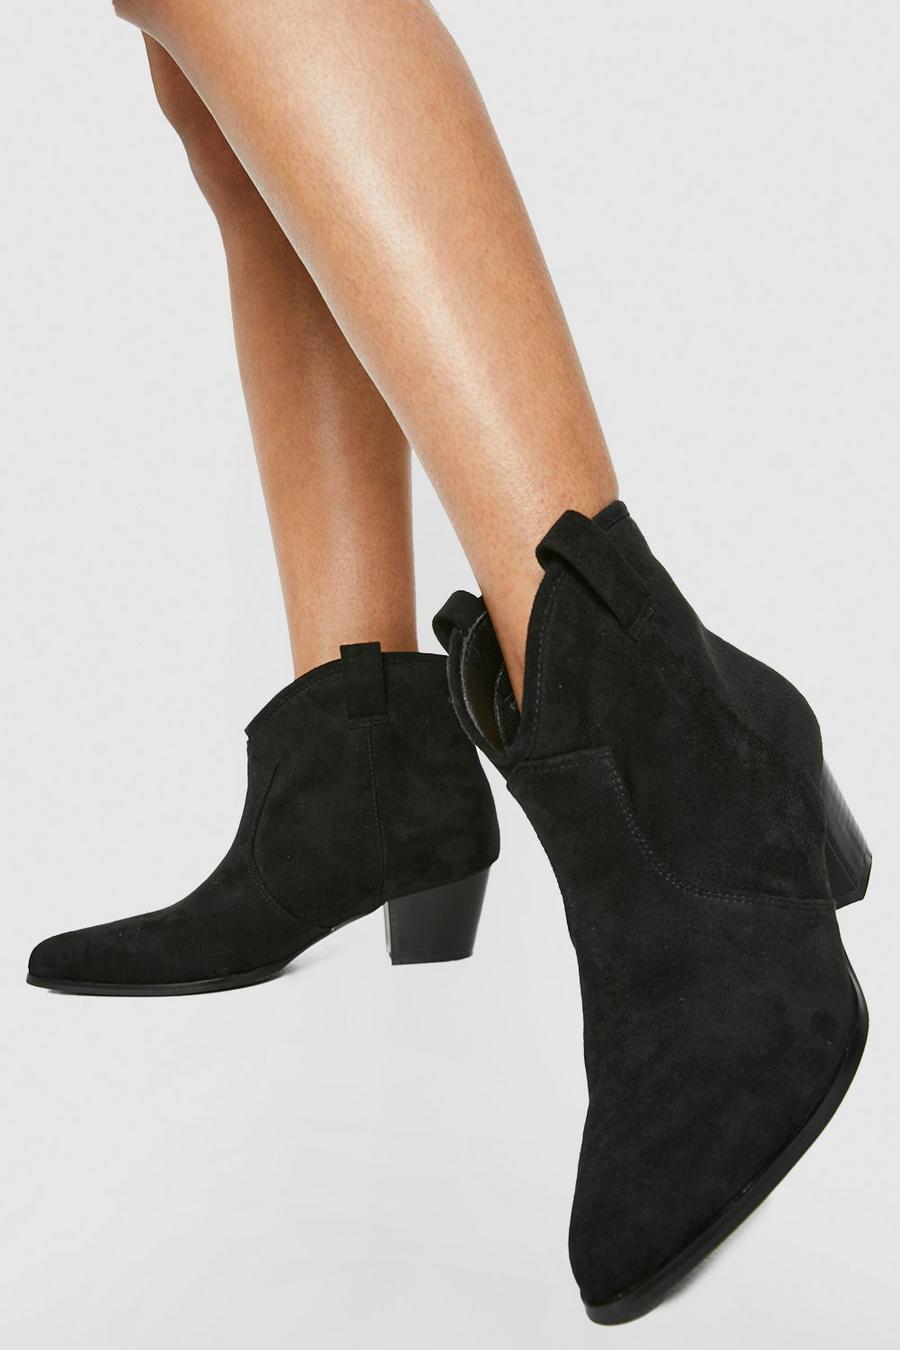 Basic Tab Detail Western Cowboy Ankle Boots  , Black negro